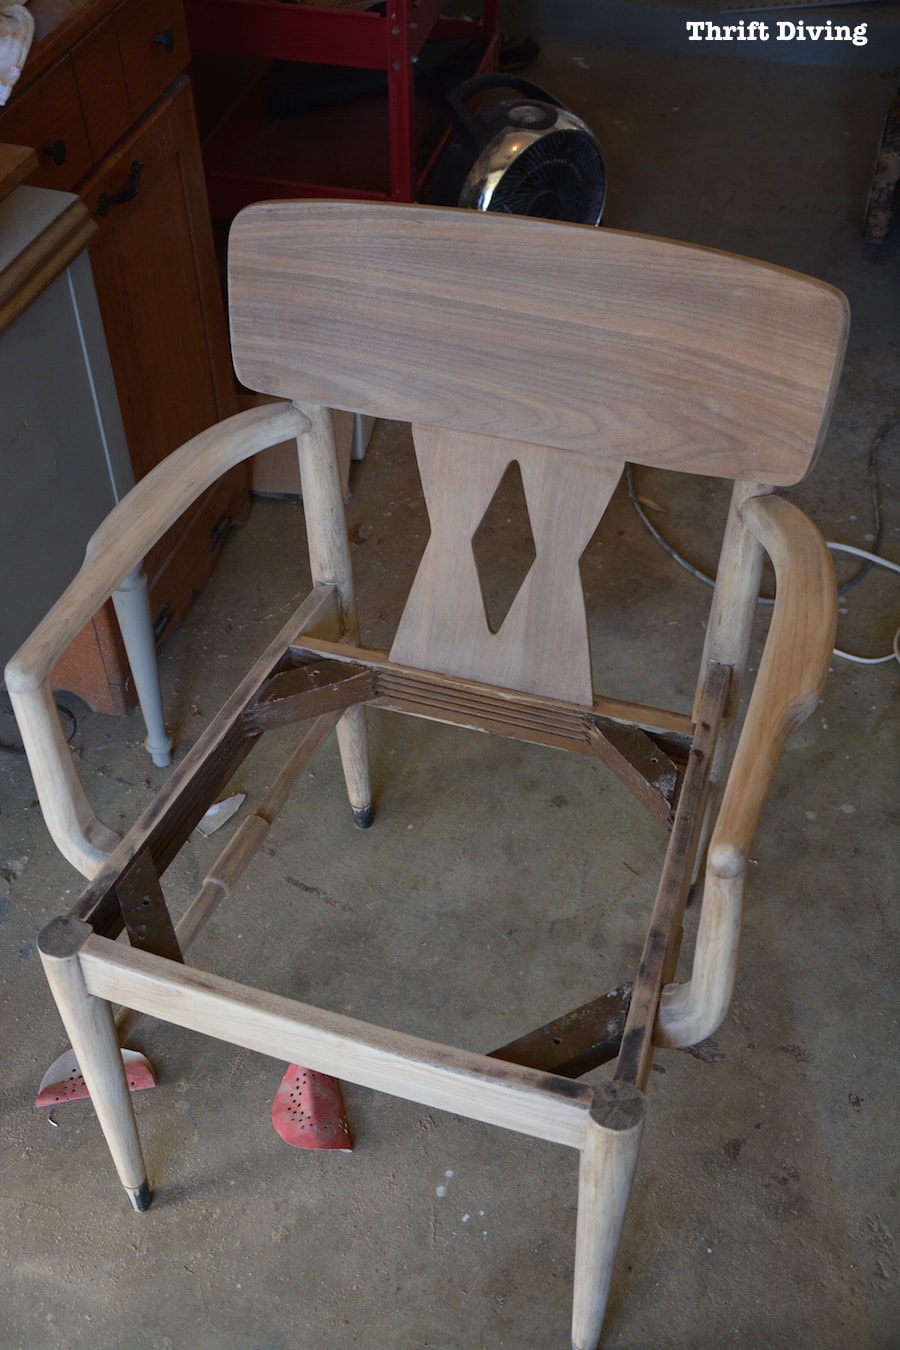 Can I Save This Mid-Century Modern Chair Makeover? PART 1